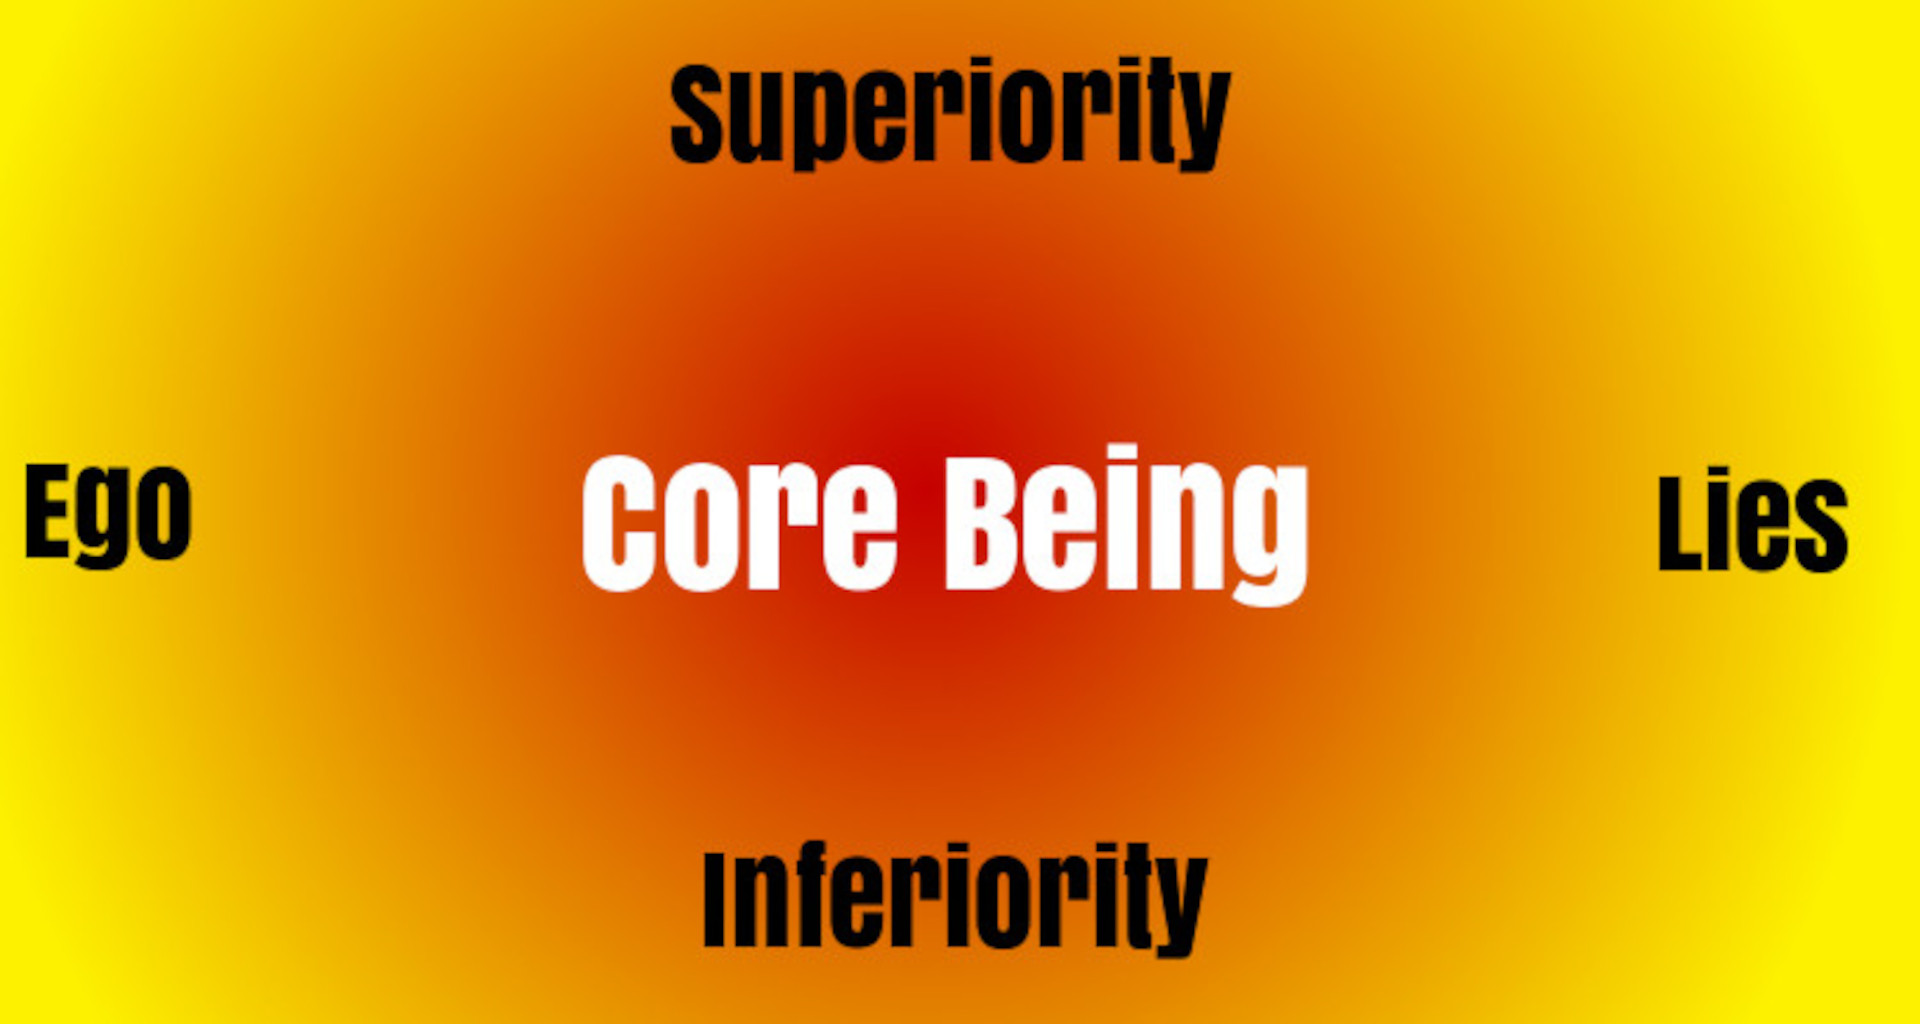 Core being